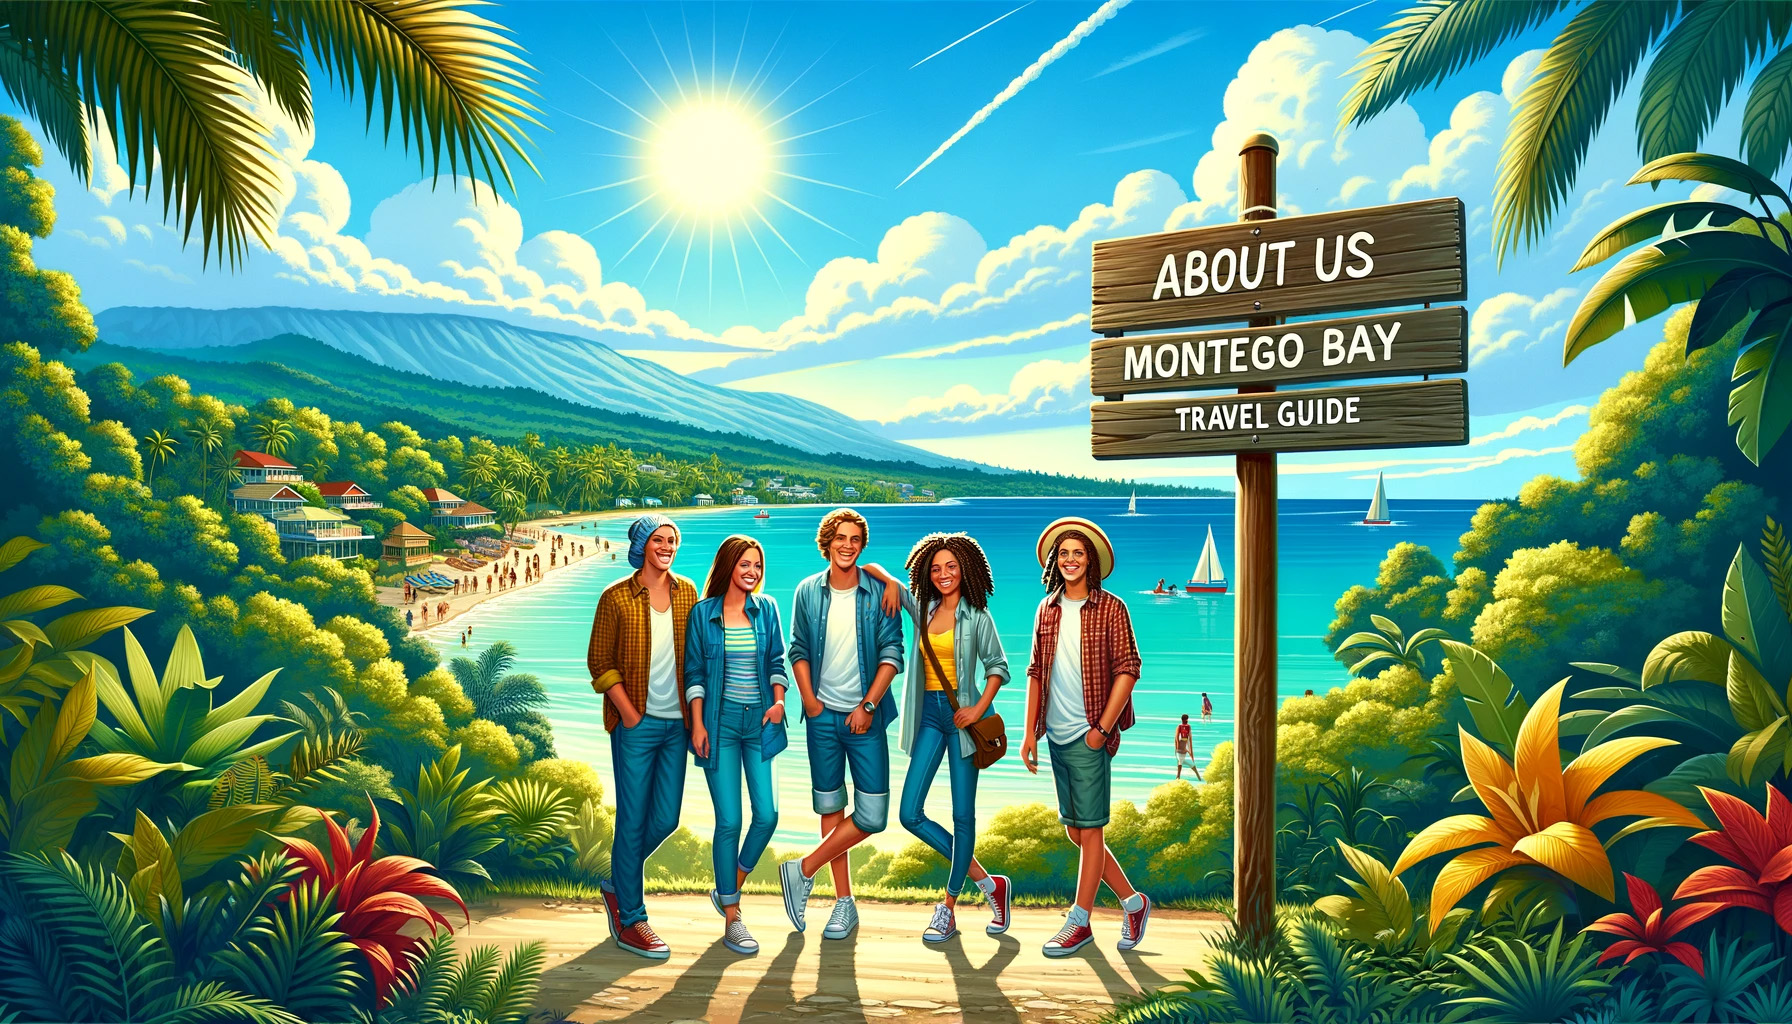 About Us - Montego Bay Travel Guide